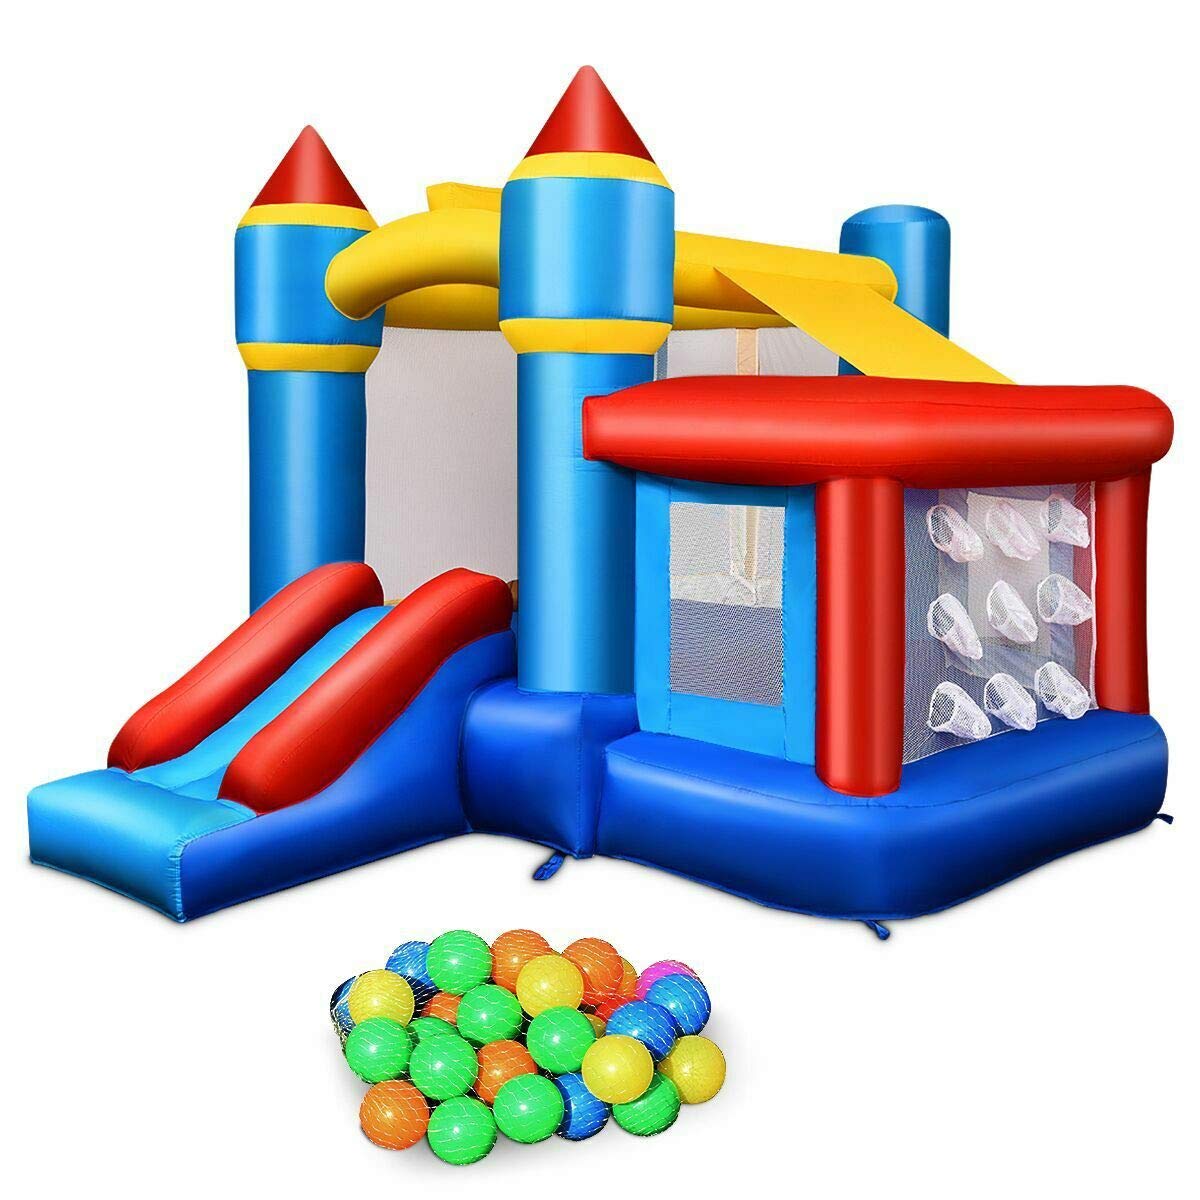 Inflatable Bounce House Castle with Balls & Bag, Multicolored